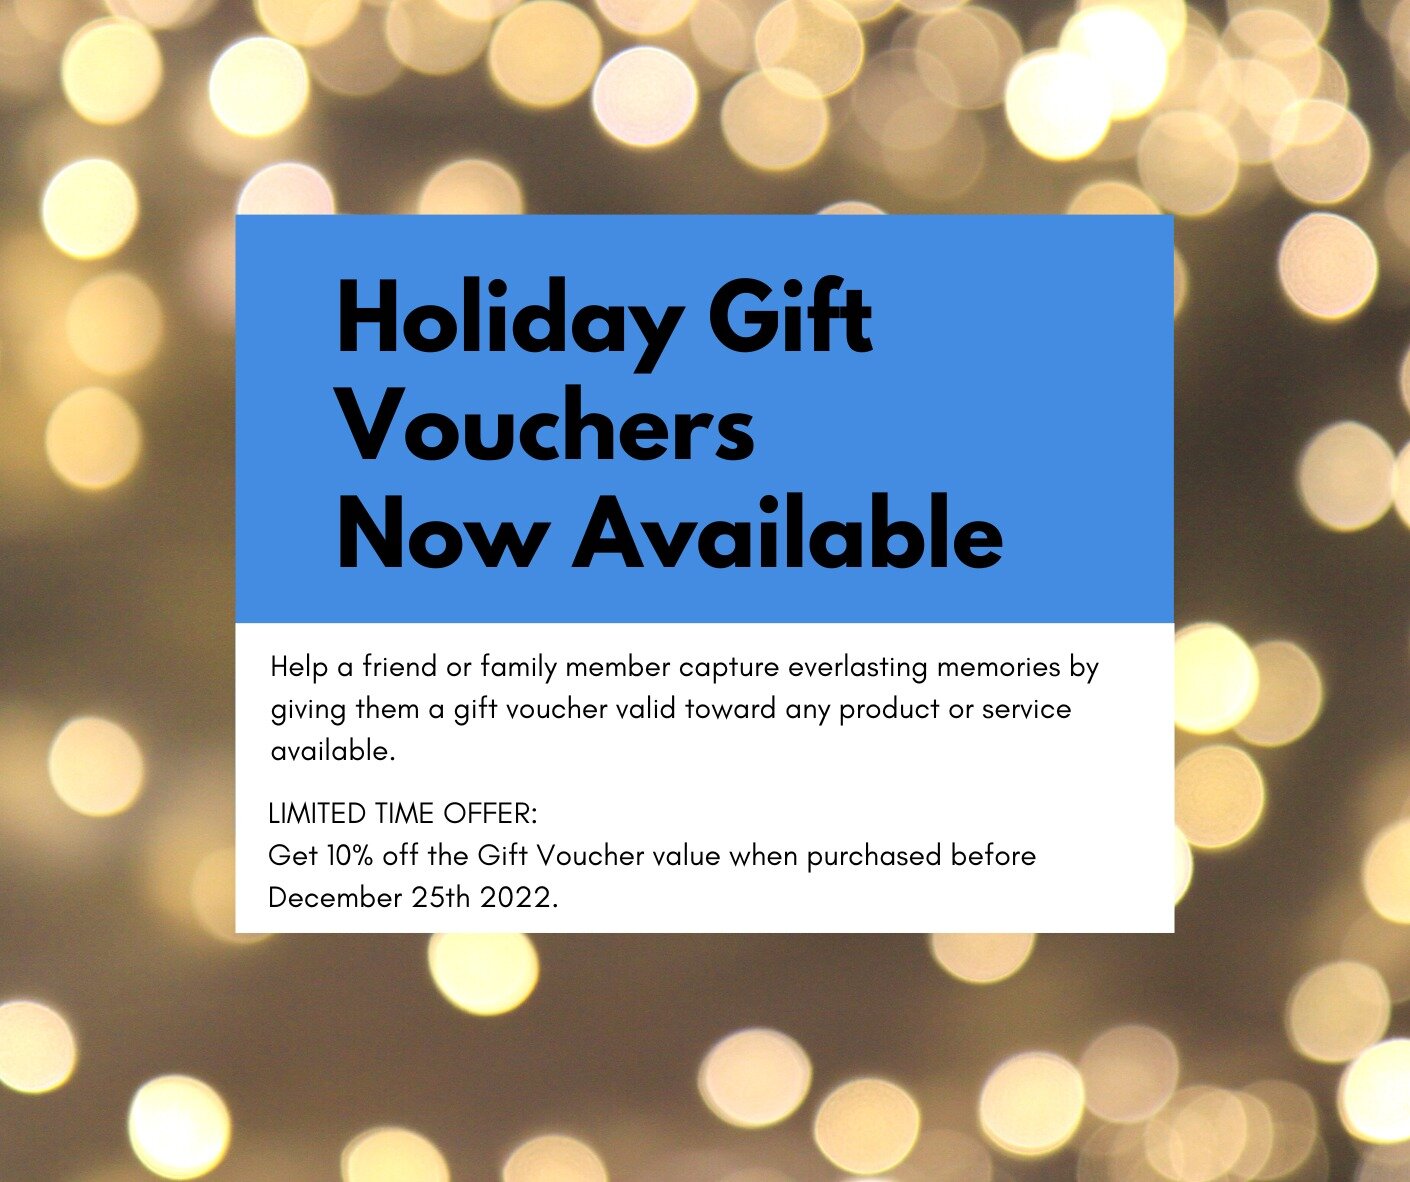 Holiday Gift Vouchers are back! Help a friend or family member capture everlasting memories and for a limited time receive 10% off the gift voucher value.